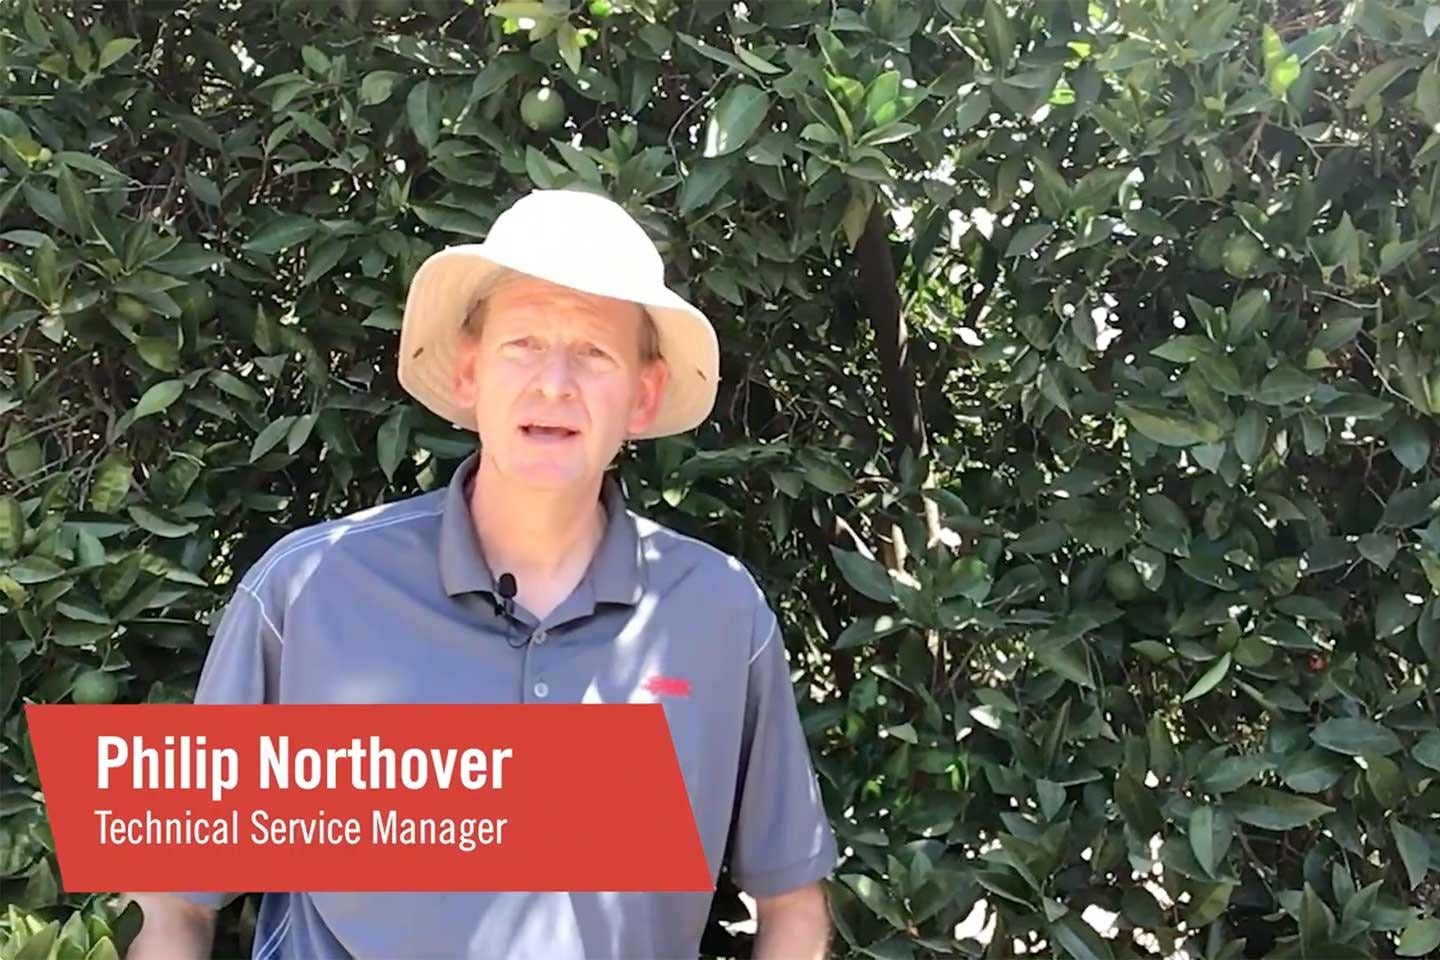 Philip Northover shares insights on controlling Fuller rose beetles.